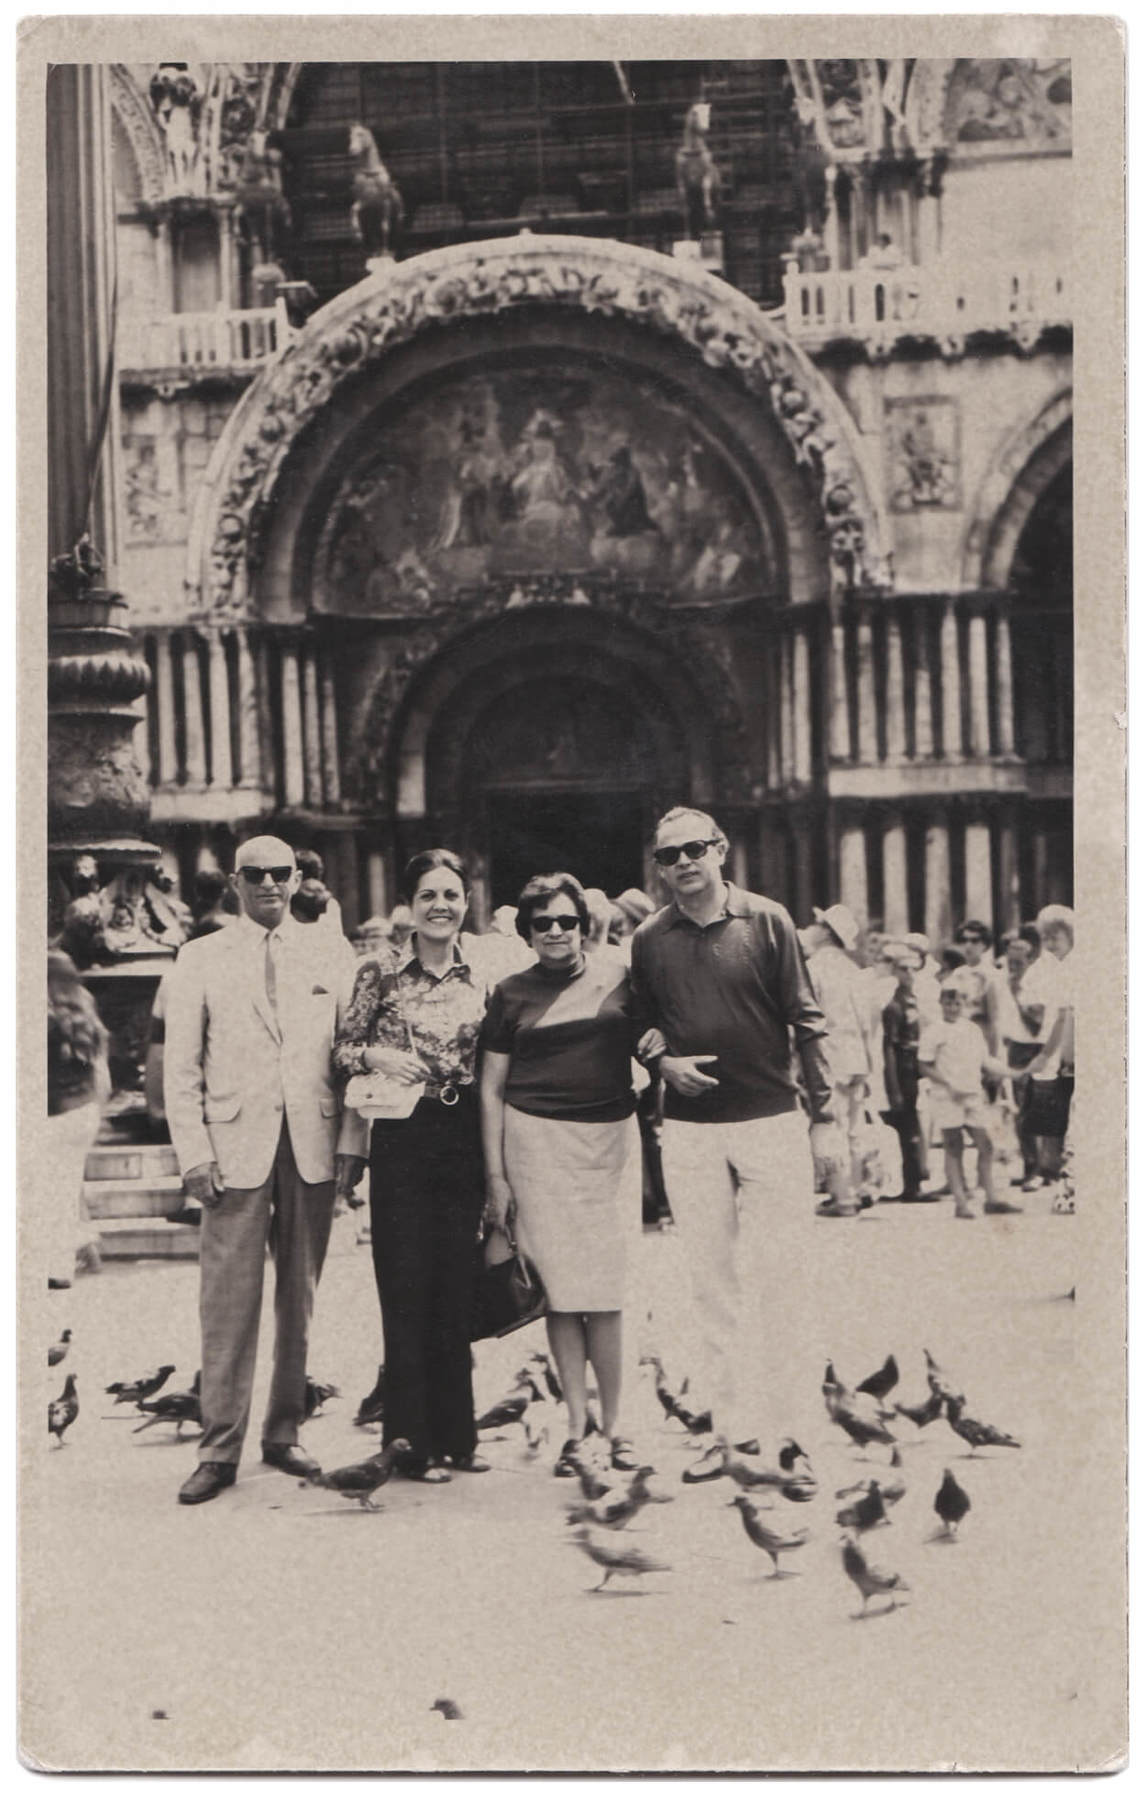 Moriţ, Lika, Tony, and Etrog during a visit to Venice, Italy, 1970s